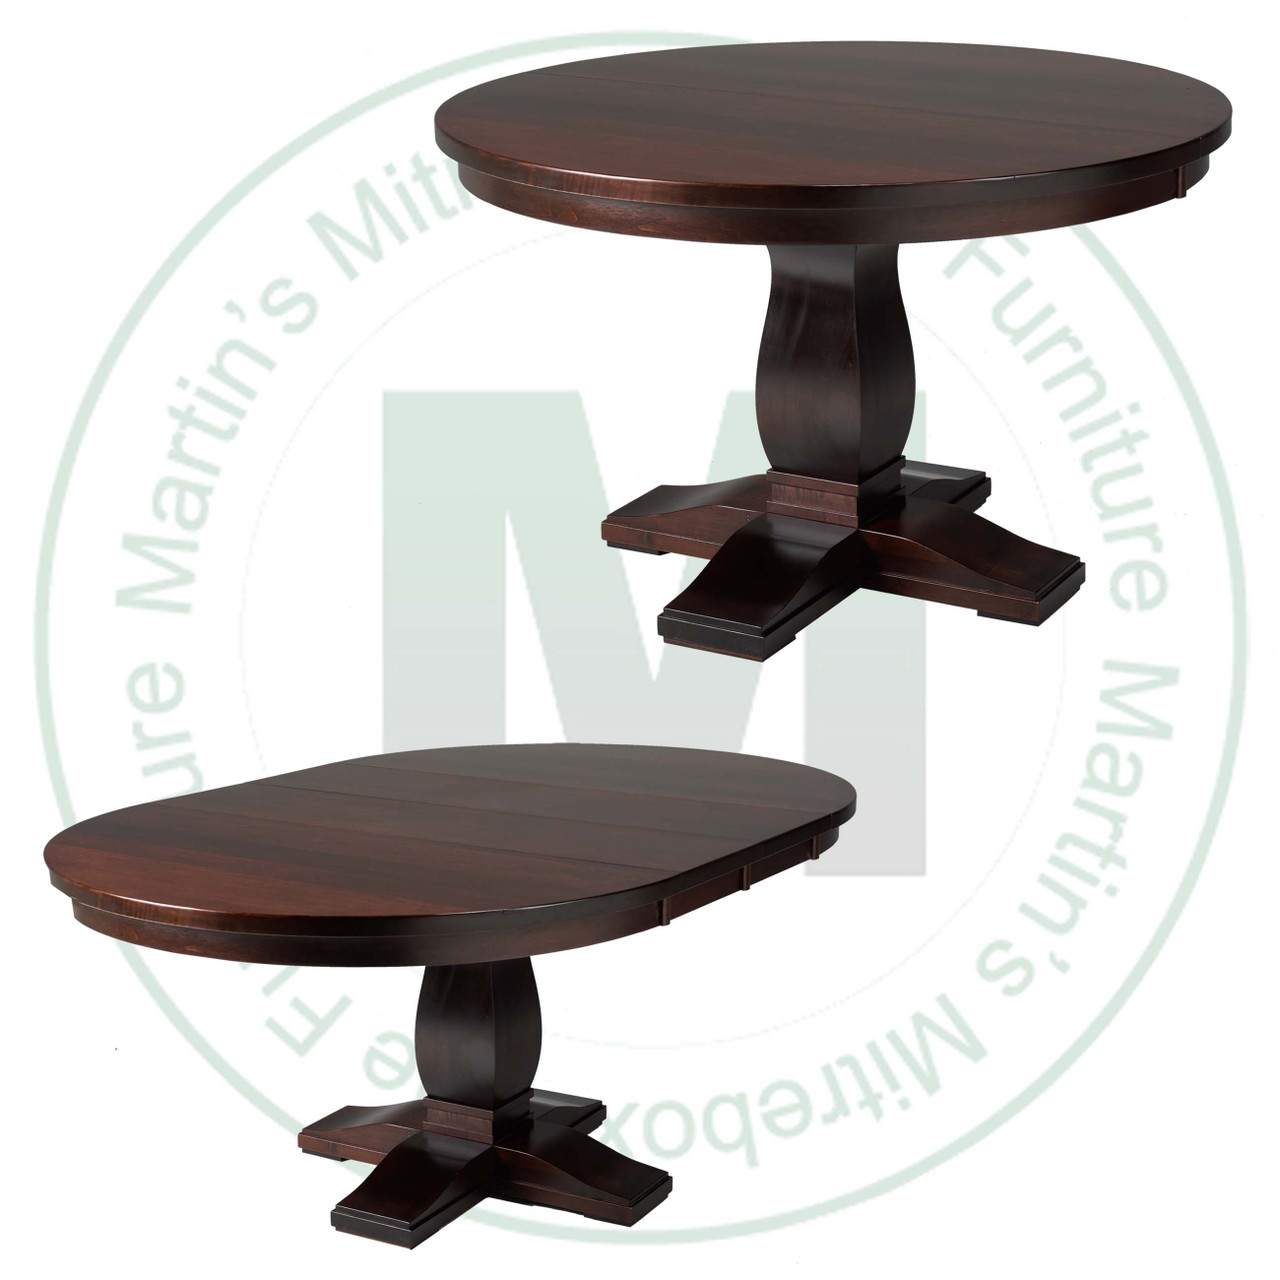 Maple Valencia Single Pedestal Table 36''D x 36''W x 30''H With 2 - 12'' Leaves Table. Table Has 1'' Thick Top.